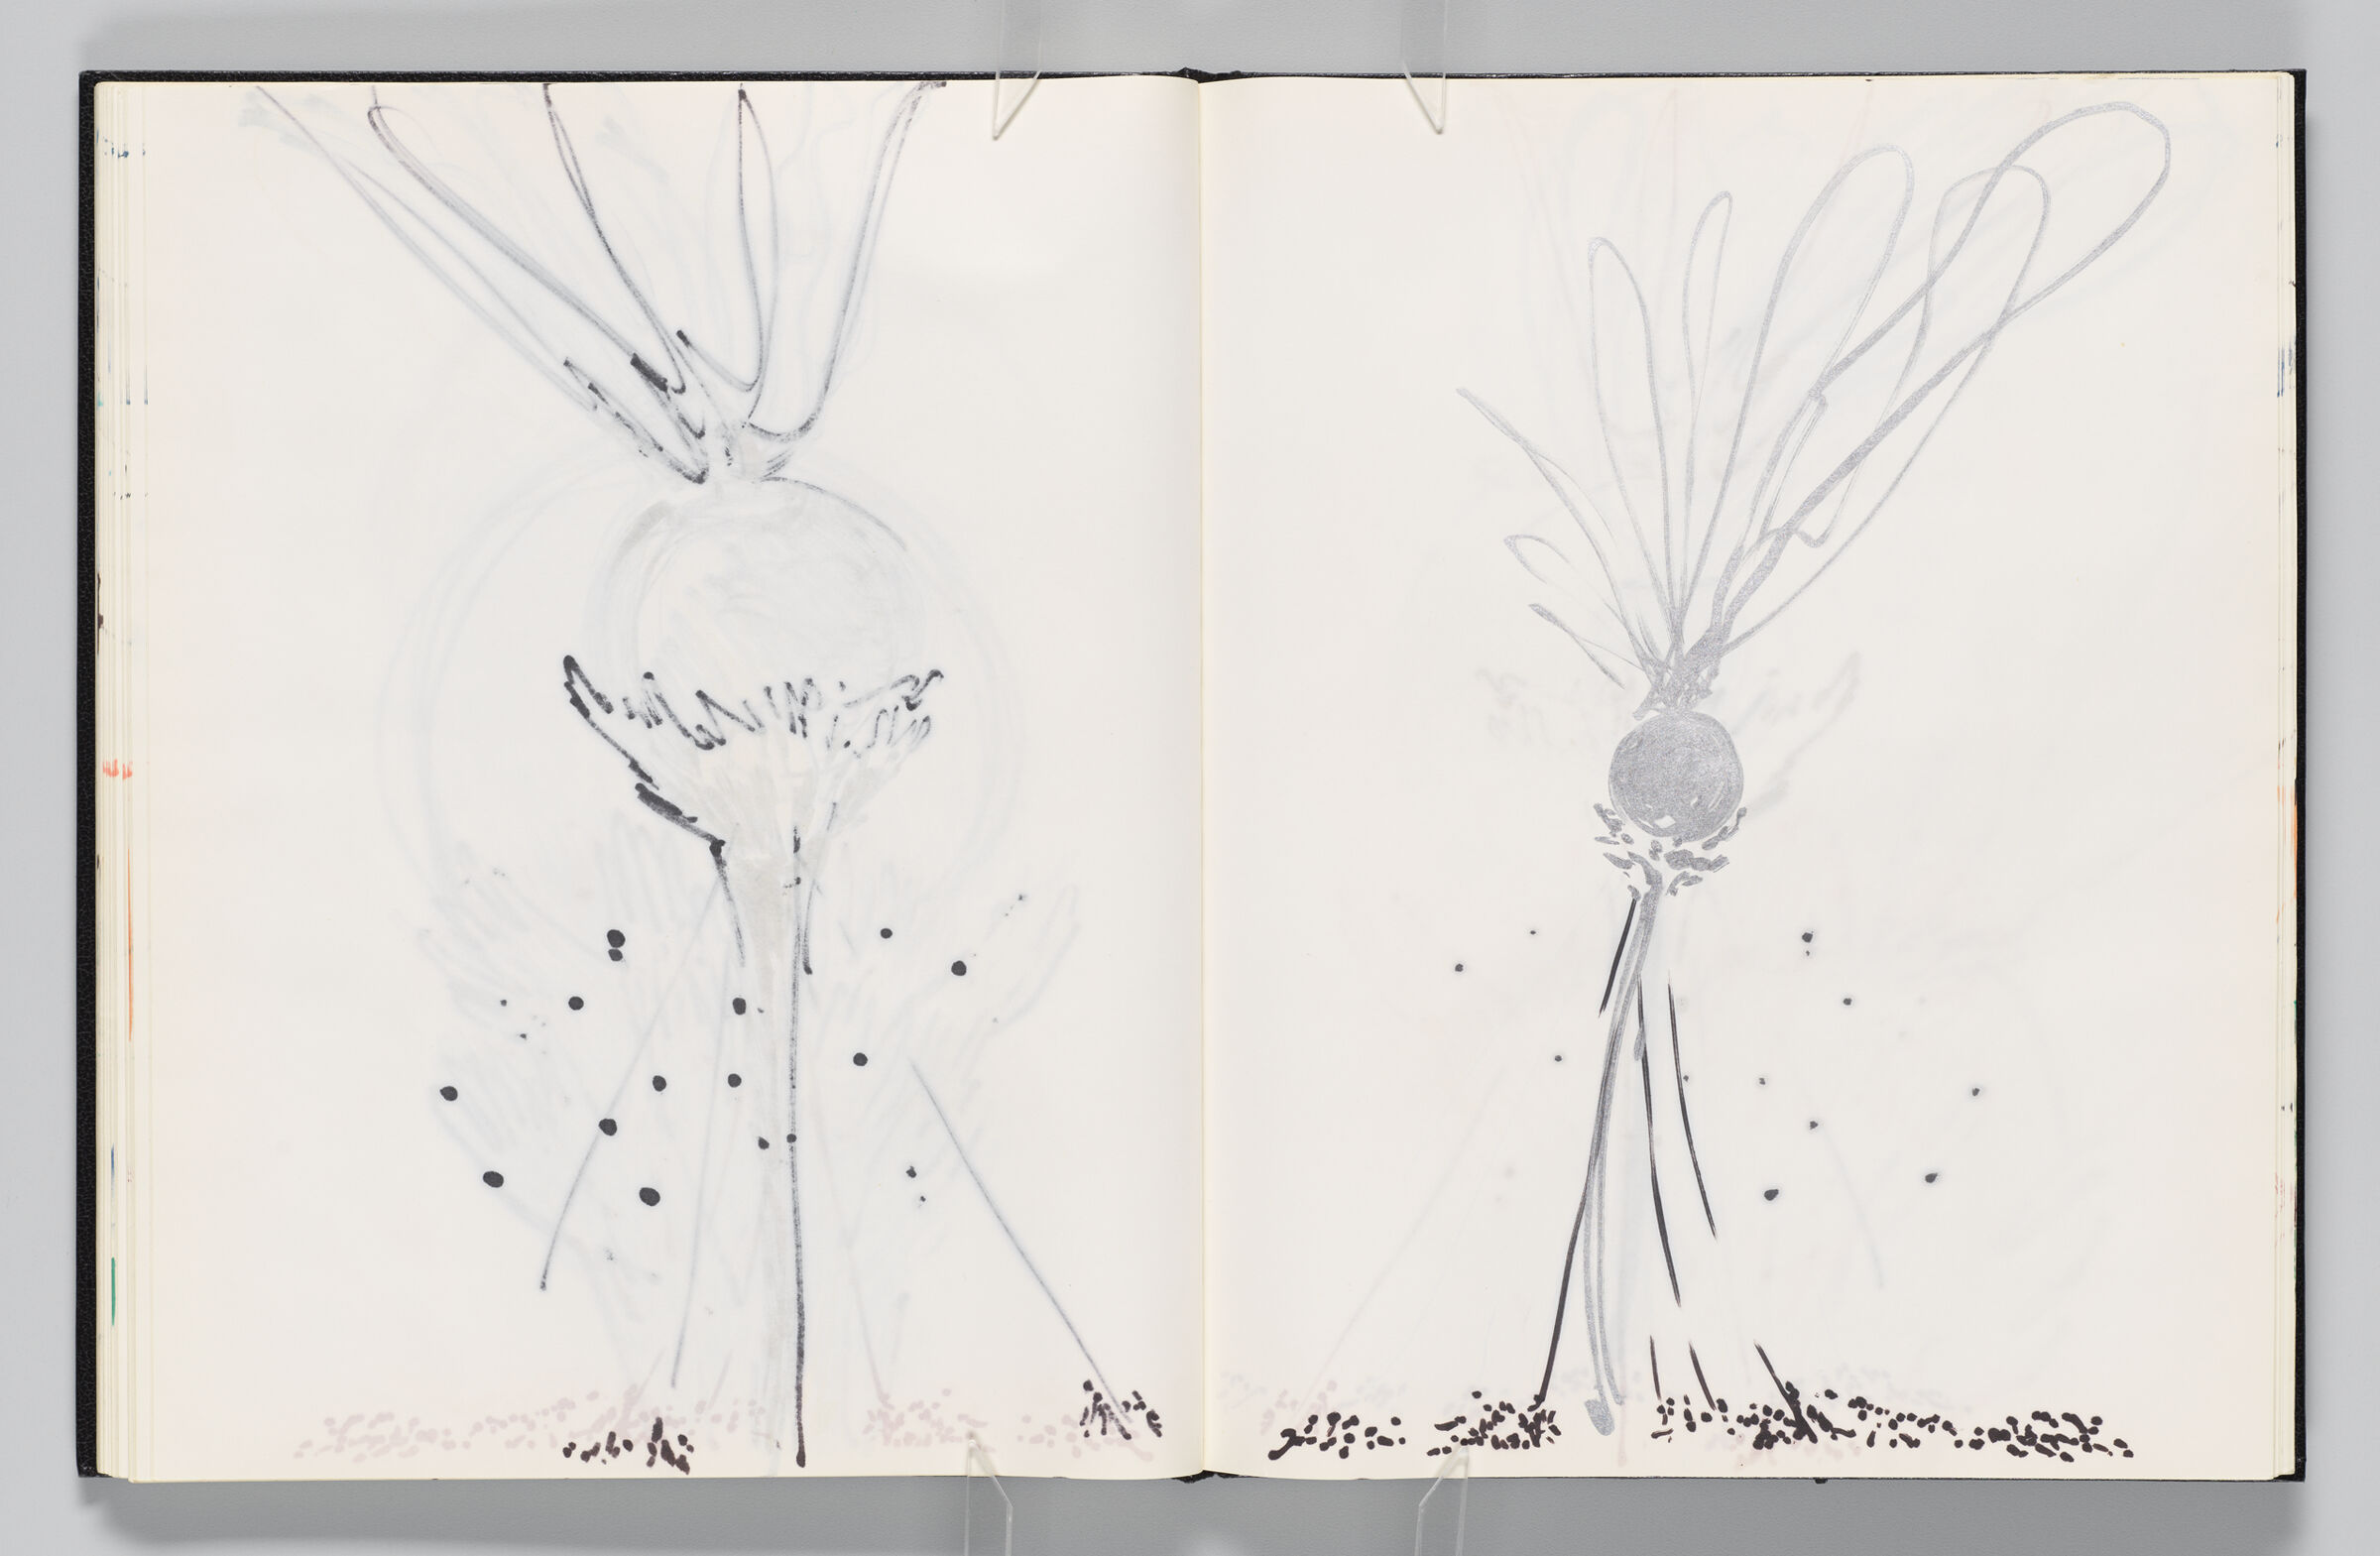 Untitled (Bleed-Through Of Previous Page, Left Page); Untitled (Hands Holding Globe With Crowd Below, Right Page)